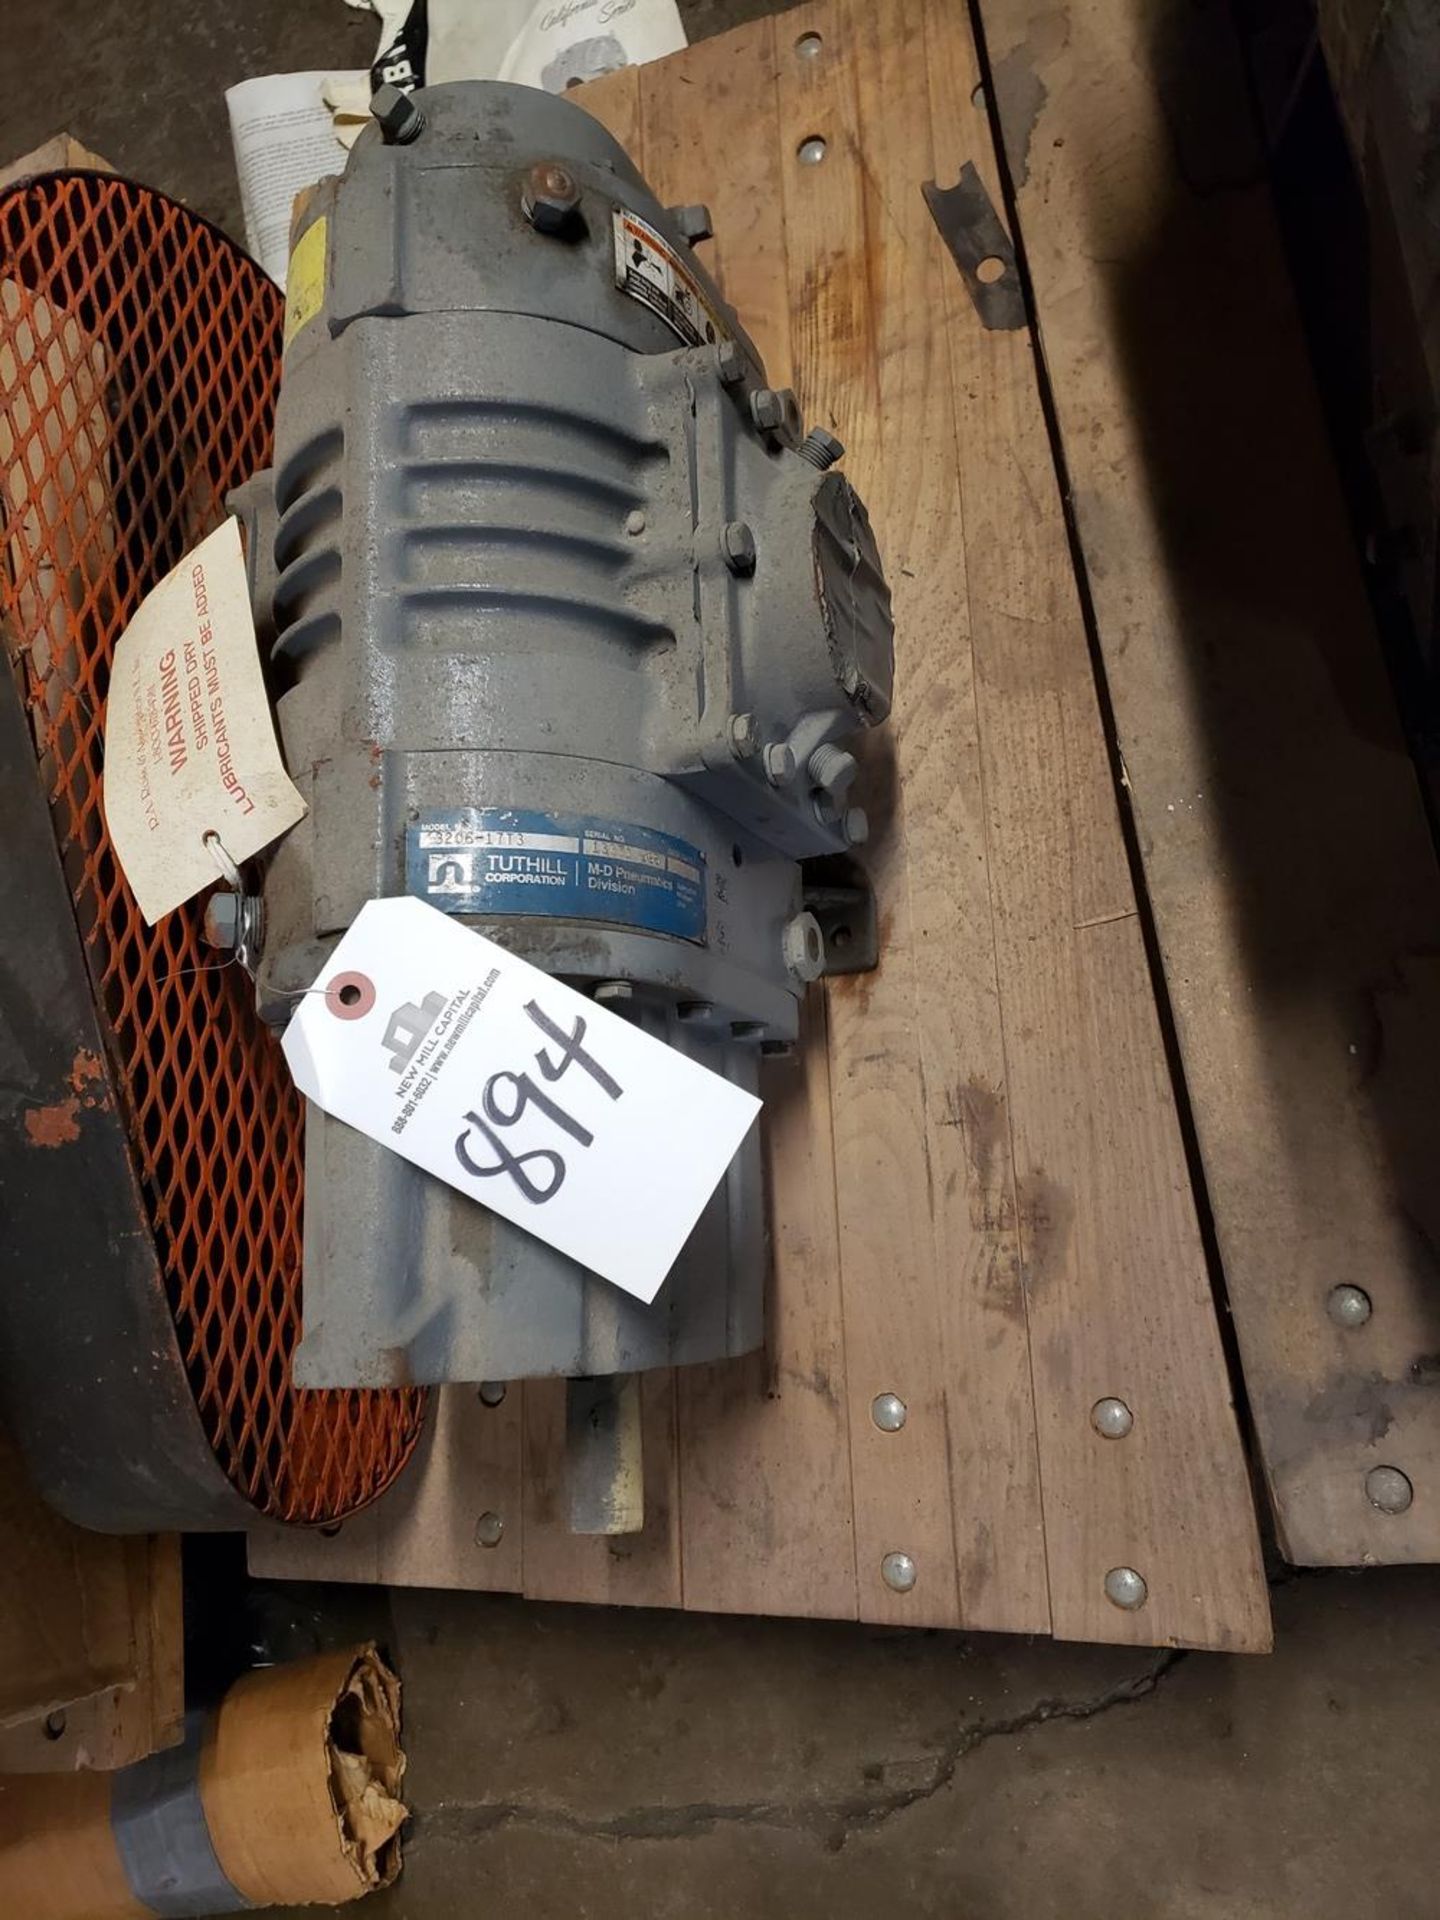 Tuthill Rotary Positive Displacement Blower, M# 3206-17T3 - Subject to Bulk Bid Lo | Rig Fee: $50